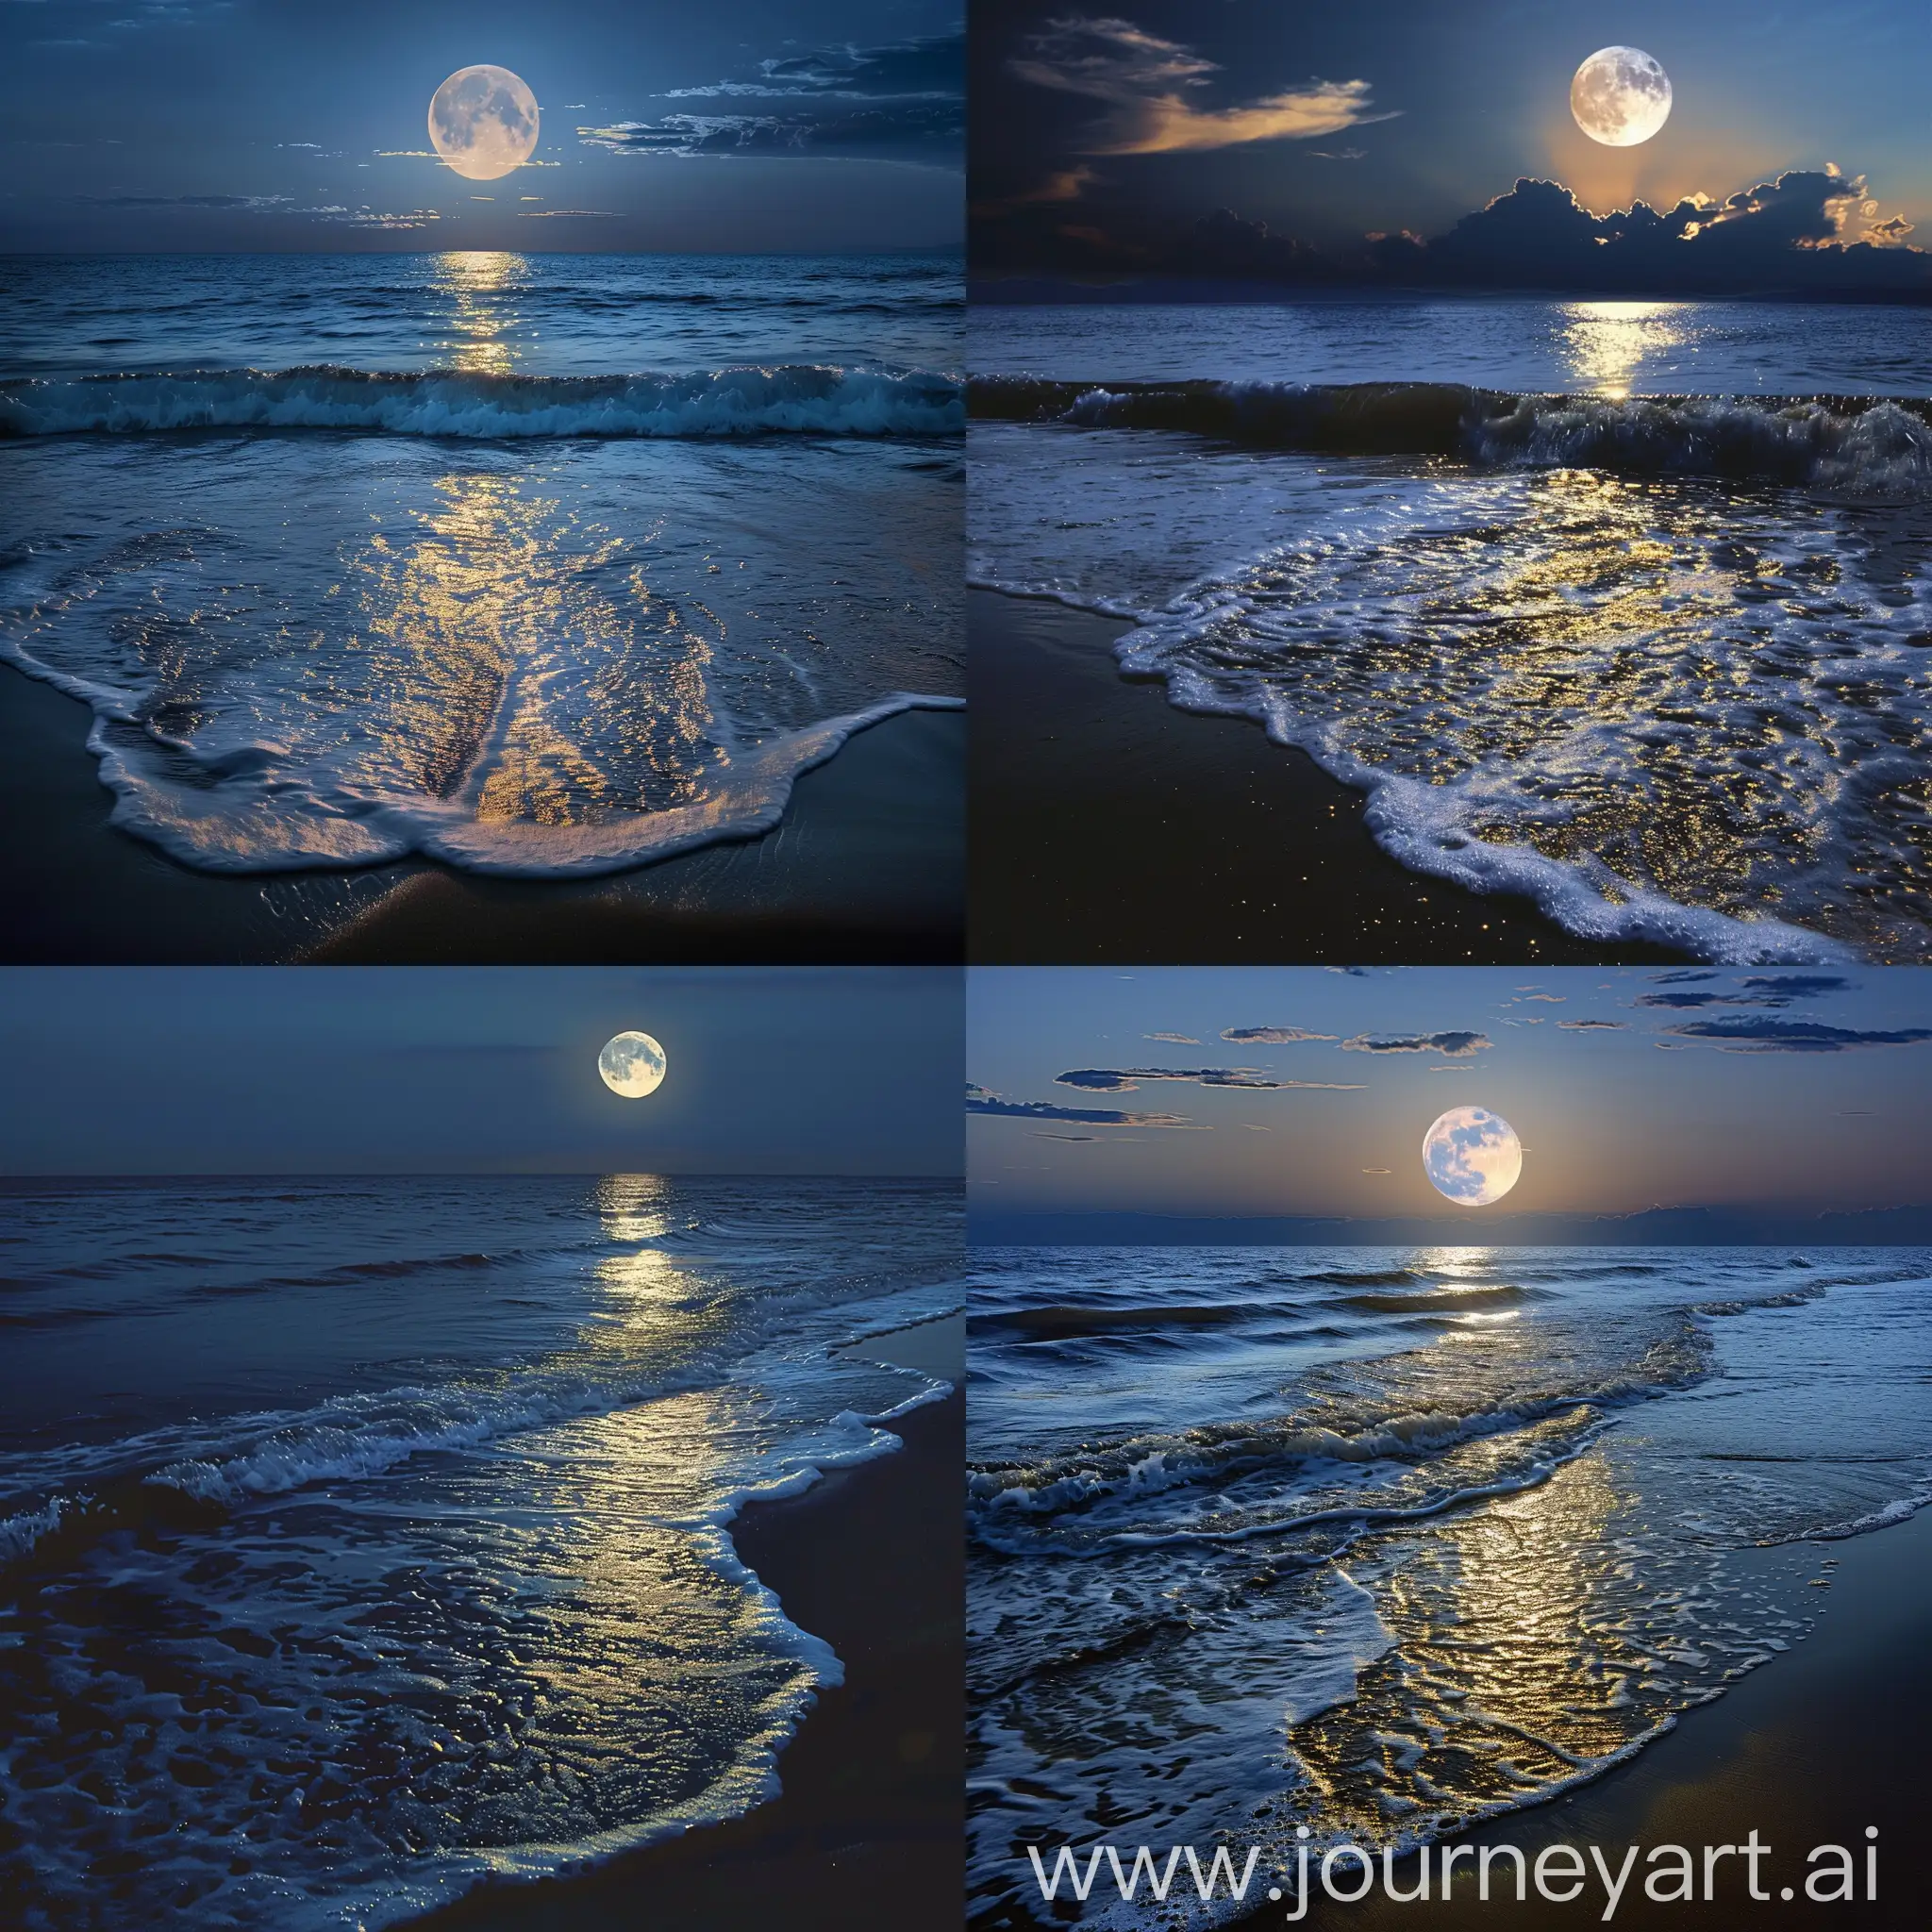 Feature a serene moonlit night with gentle waves lapping against a peaceful shore. Capture the reflection of moonlight on the water.